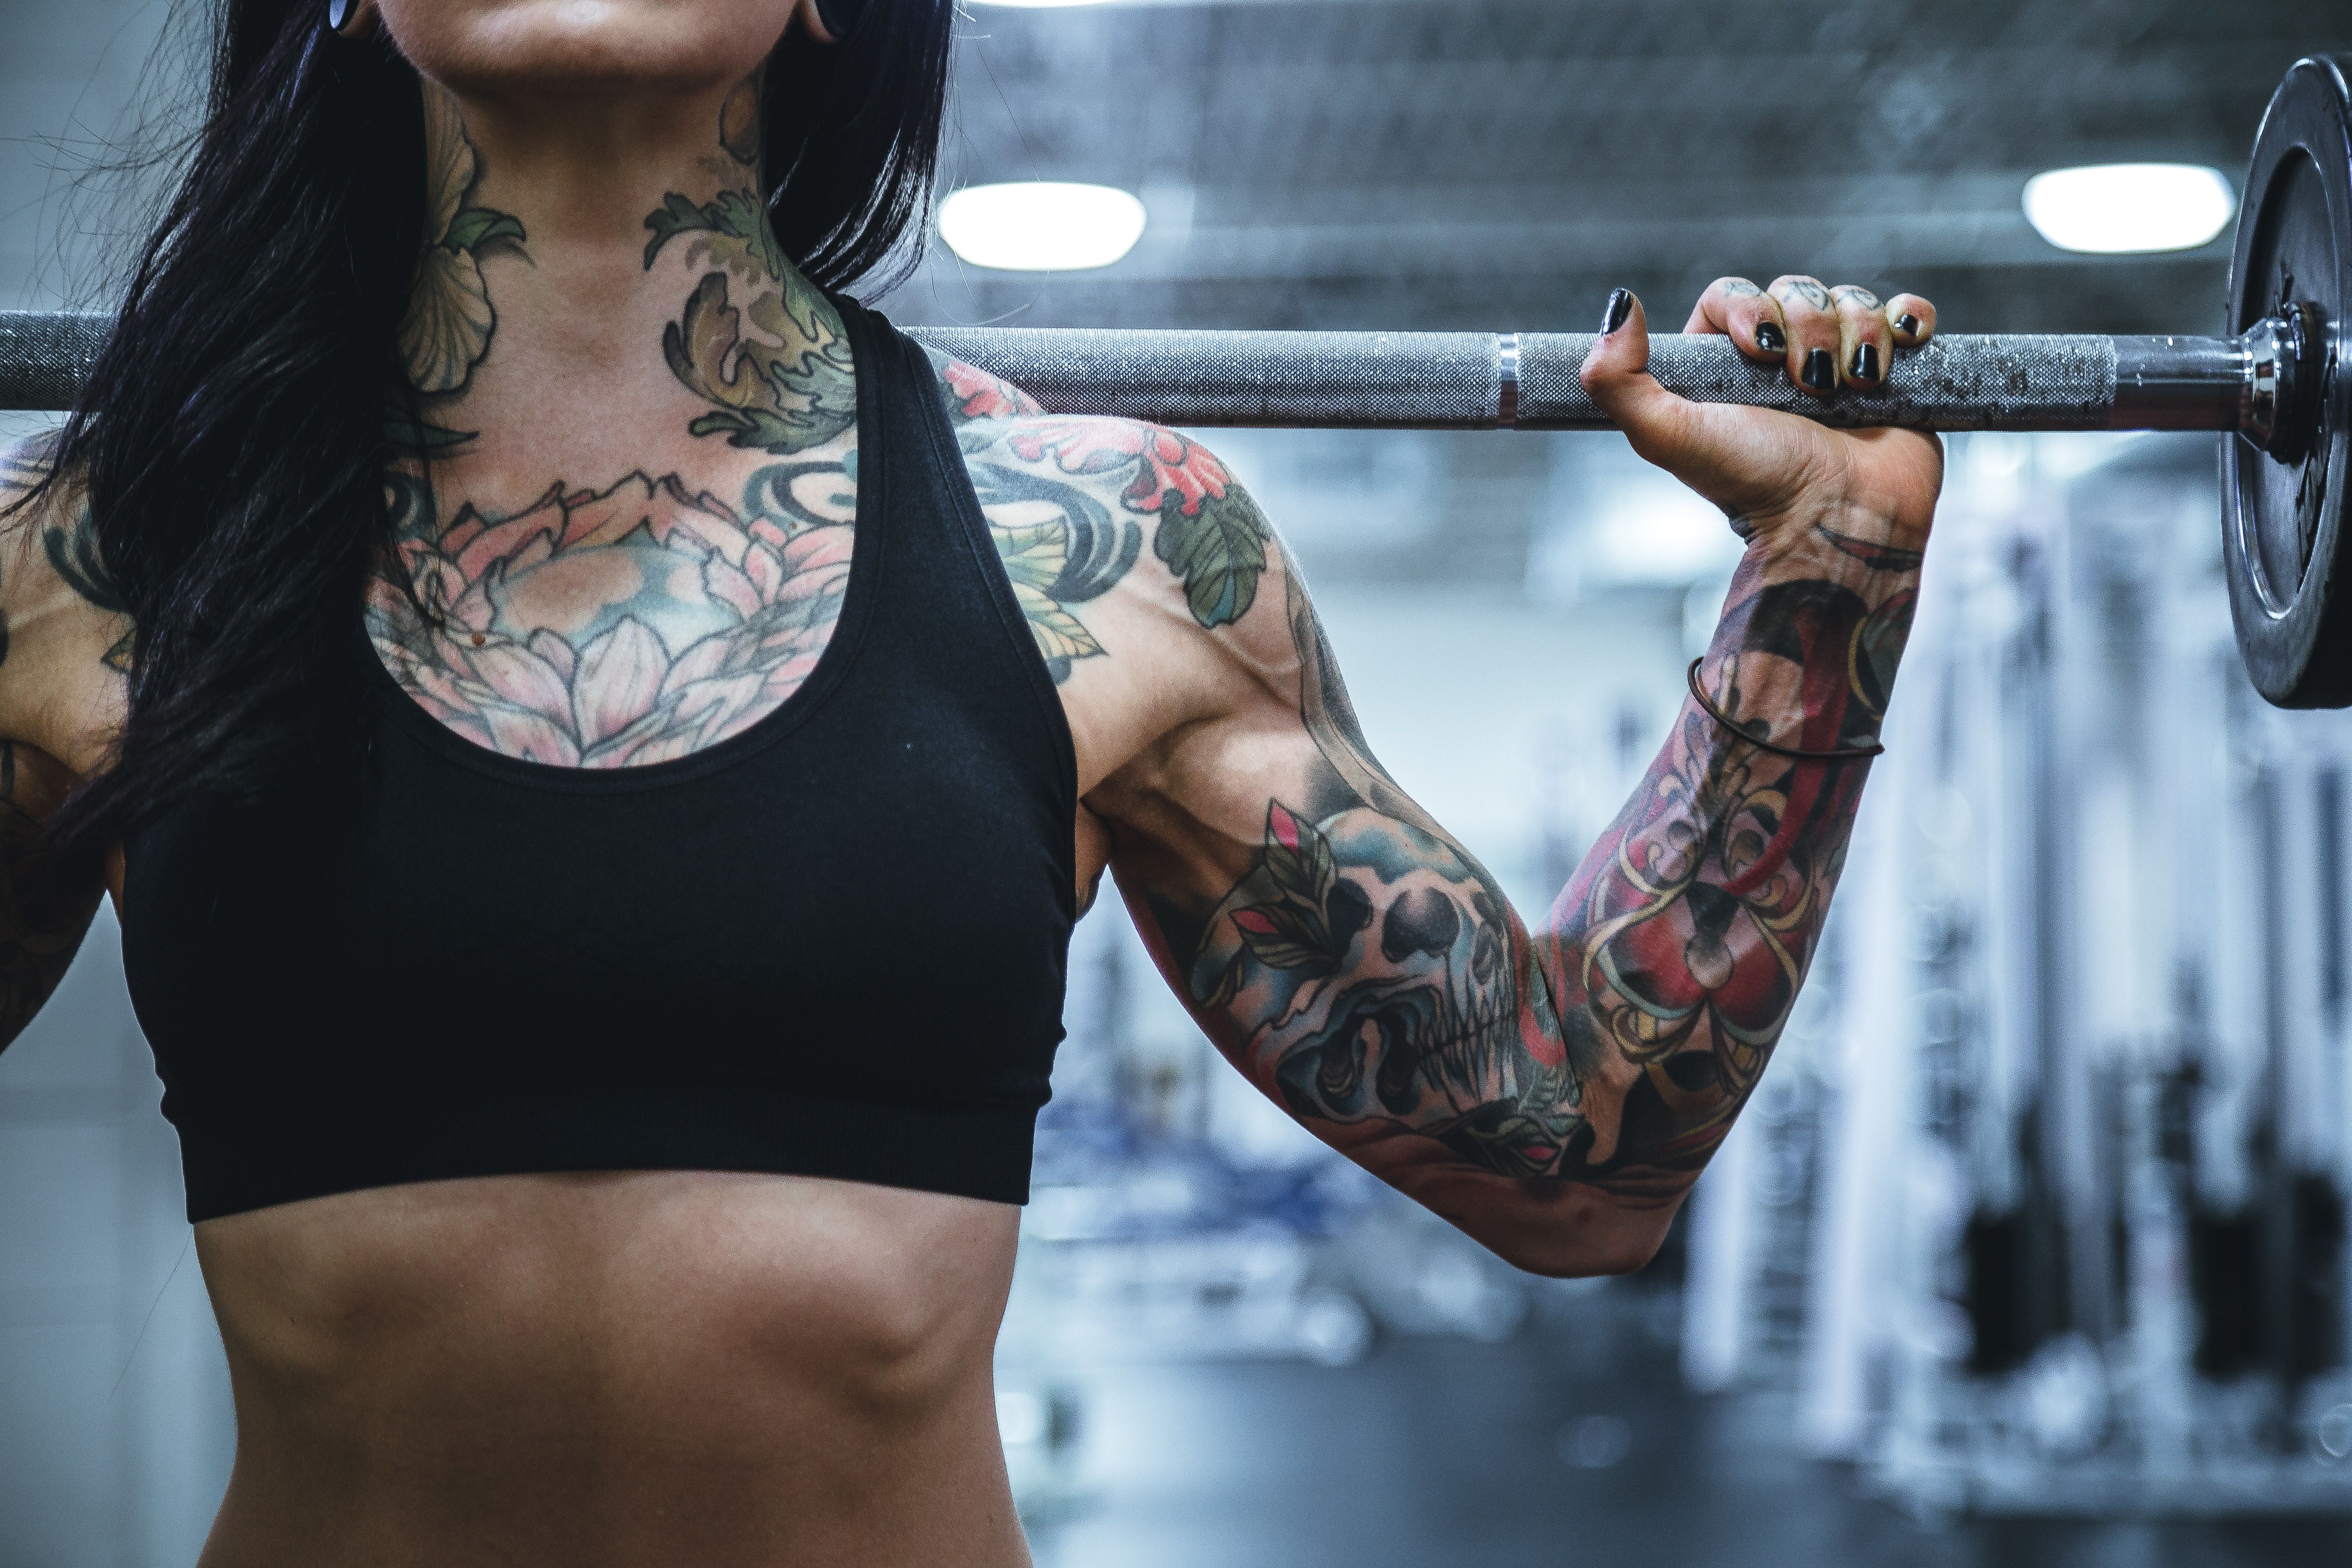 5472x3648 powerlifting, tattoo, style, ab, fitness, skull, Free image, muscle, gym, strength, fashion, female, lunge, weightlifter, body builder, woman, bicep, weight, sportswear, black, workout. Mocah.org HD Desktop Wallpaper